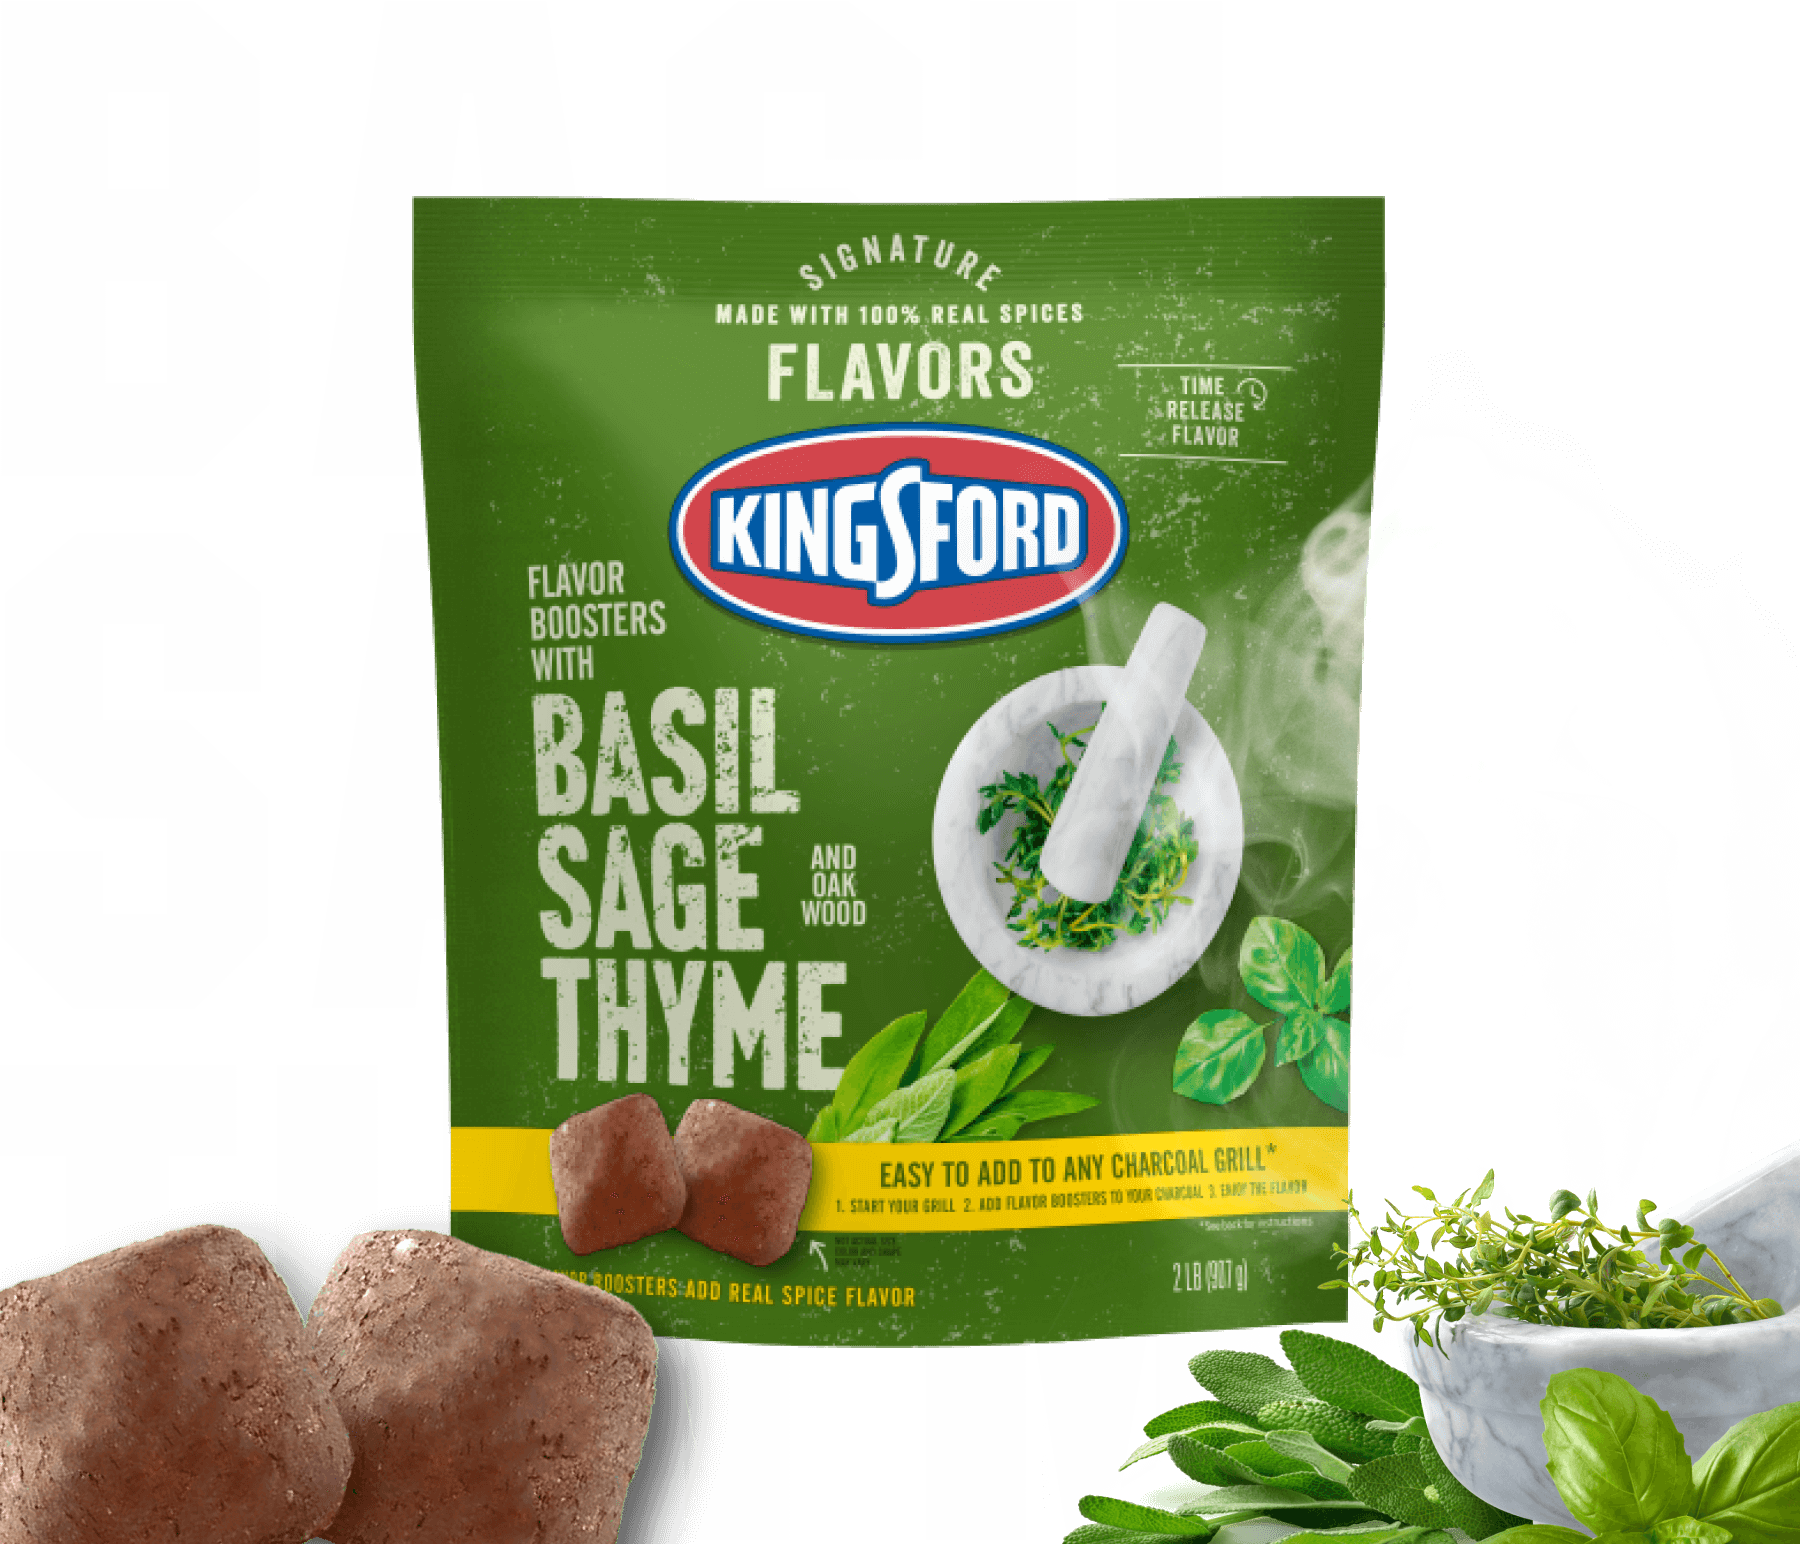 Kingsford® Signature Flavors Flavor Boosters — Basil Sage Thyme